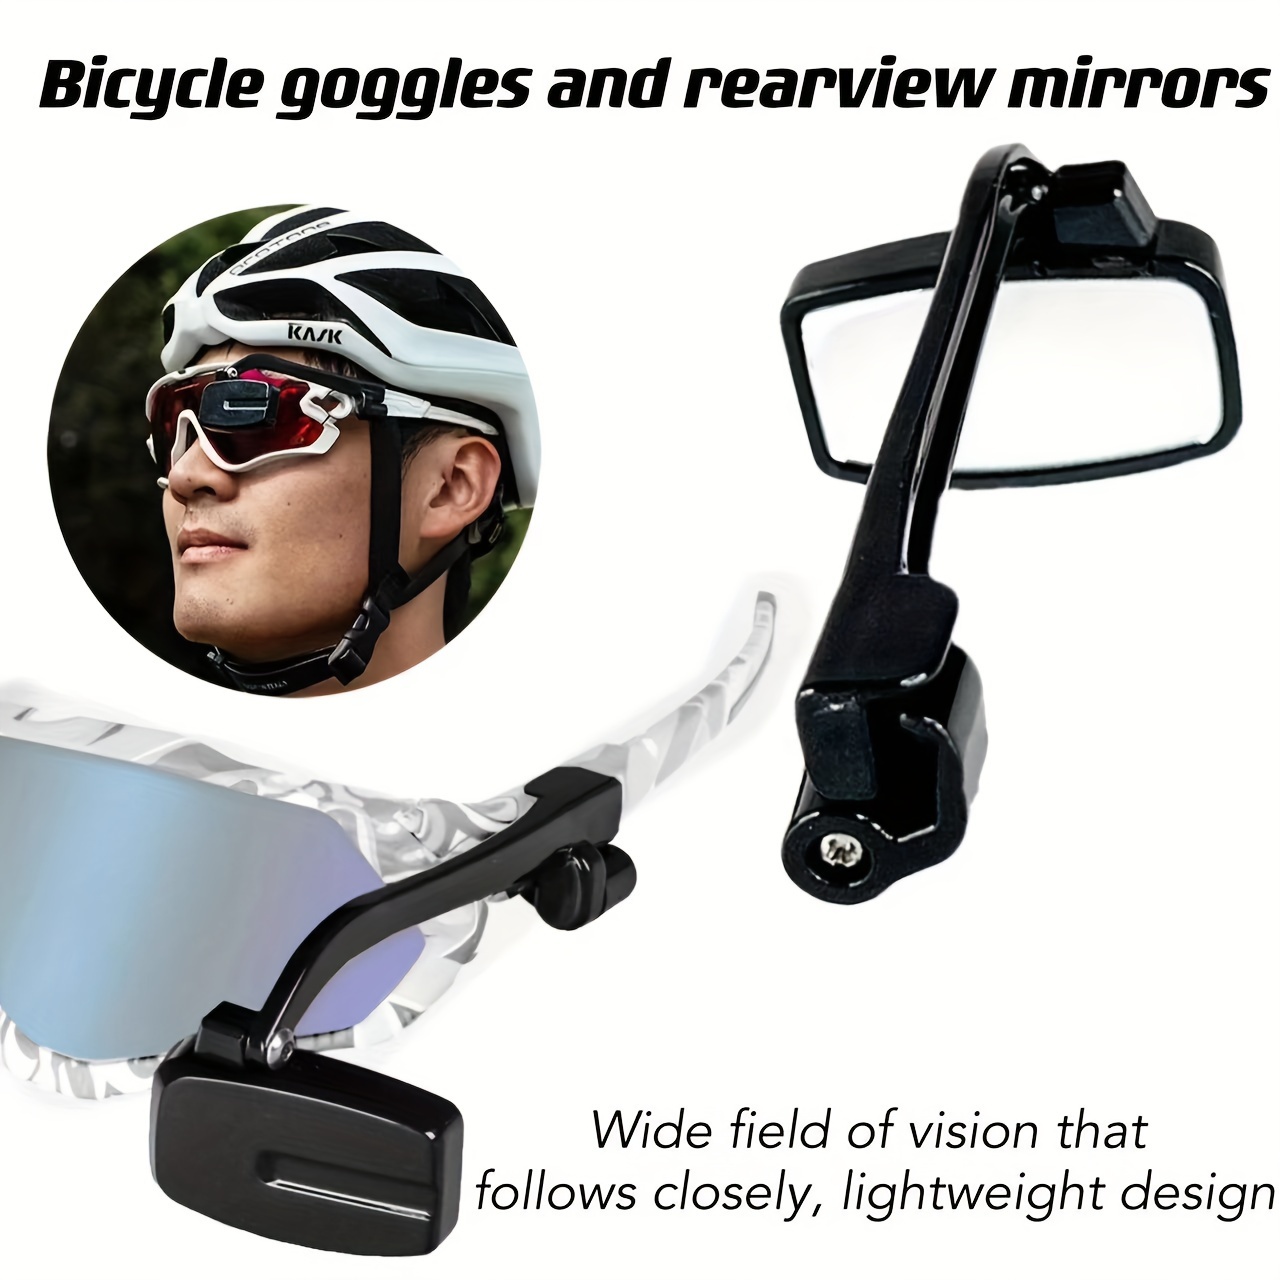 

Adjustable Bike Rearview Mirror - Compact, Lightweight & Rotatable For Safe Cycling